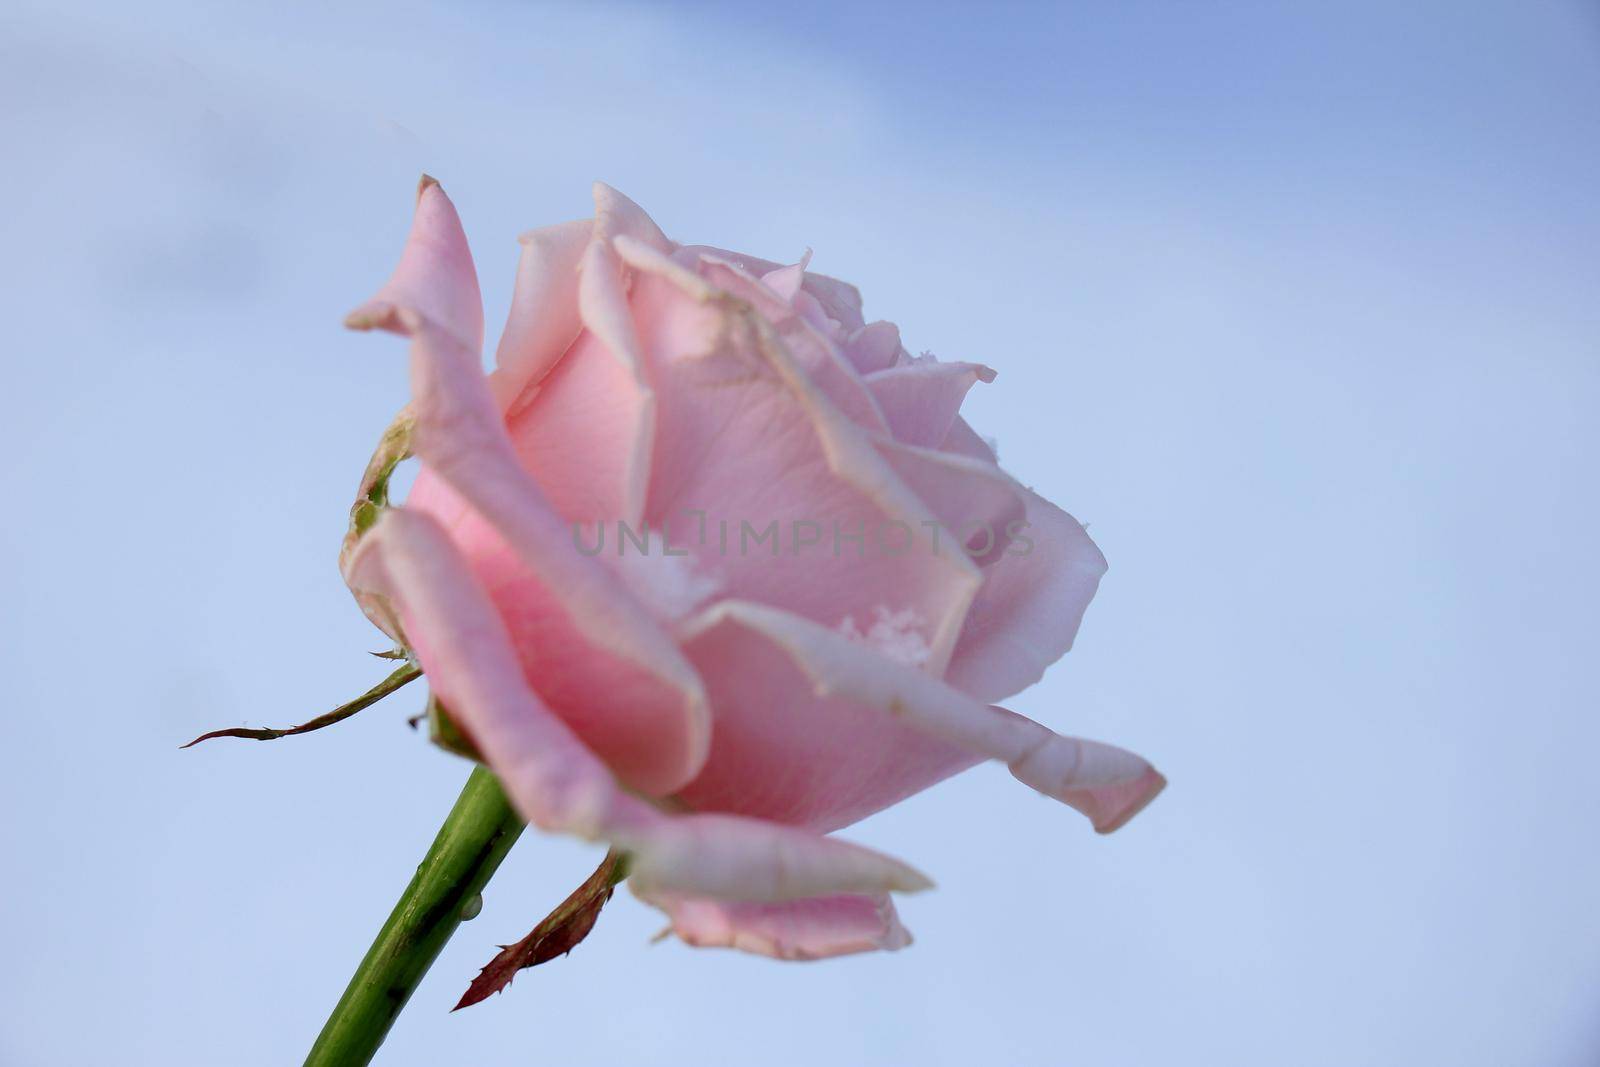 a pale pink rose in the fresh snow by studioportosabbia